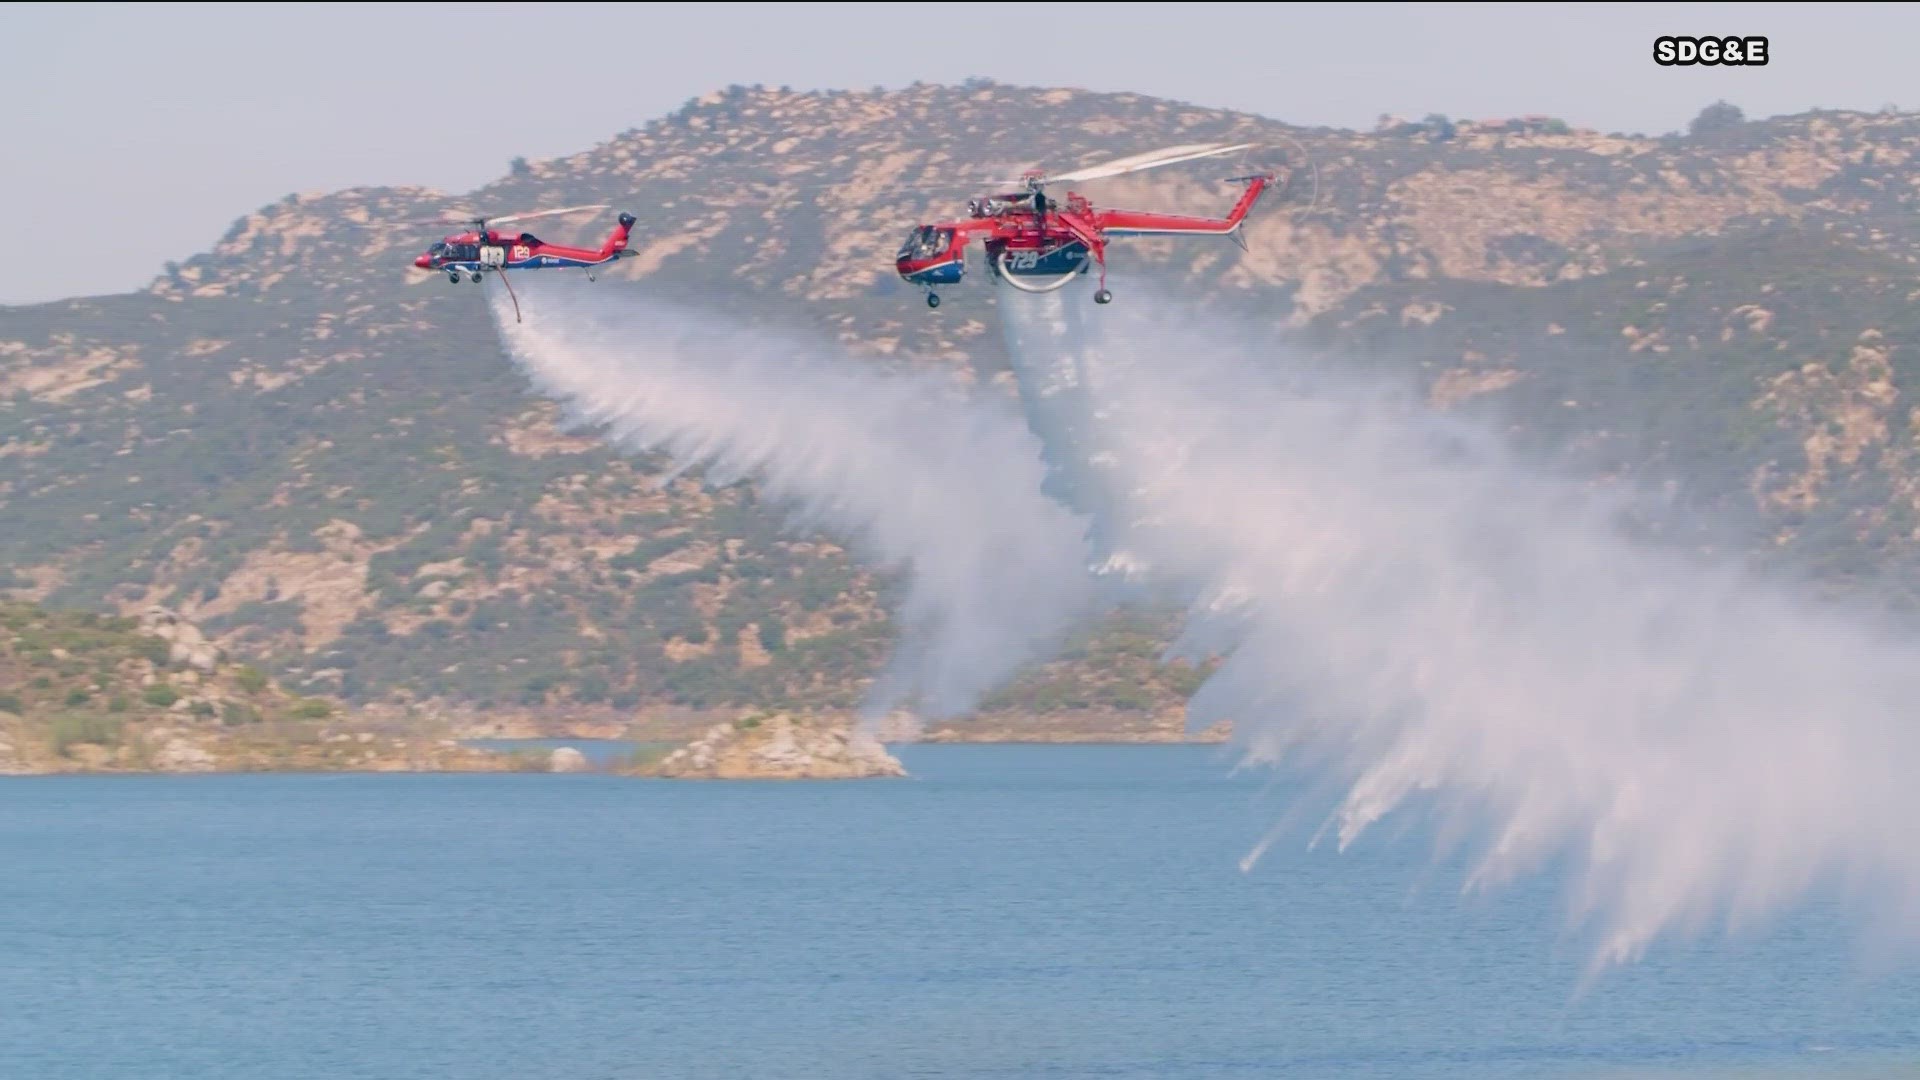 SDG&E has two helicopters in its fleet solely dedicated to fighting fires.